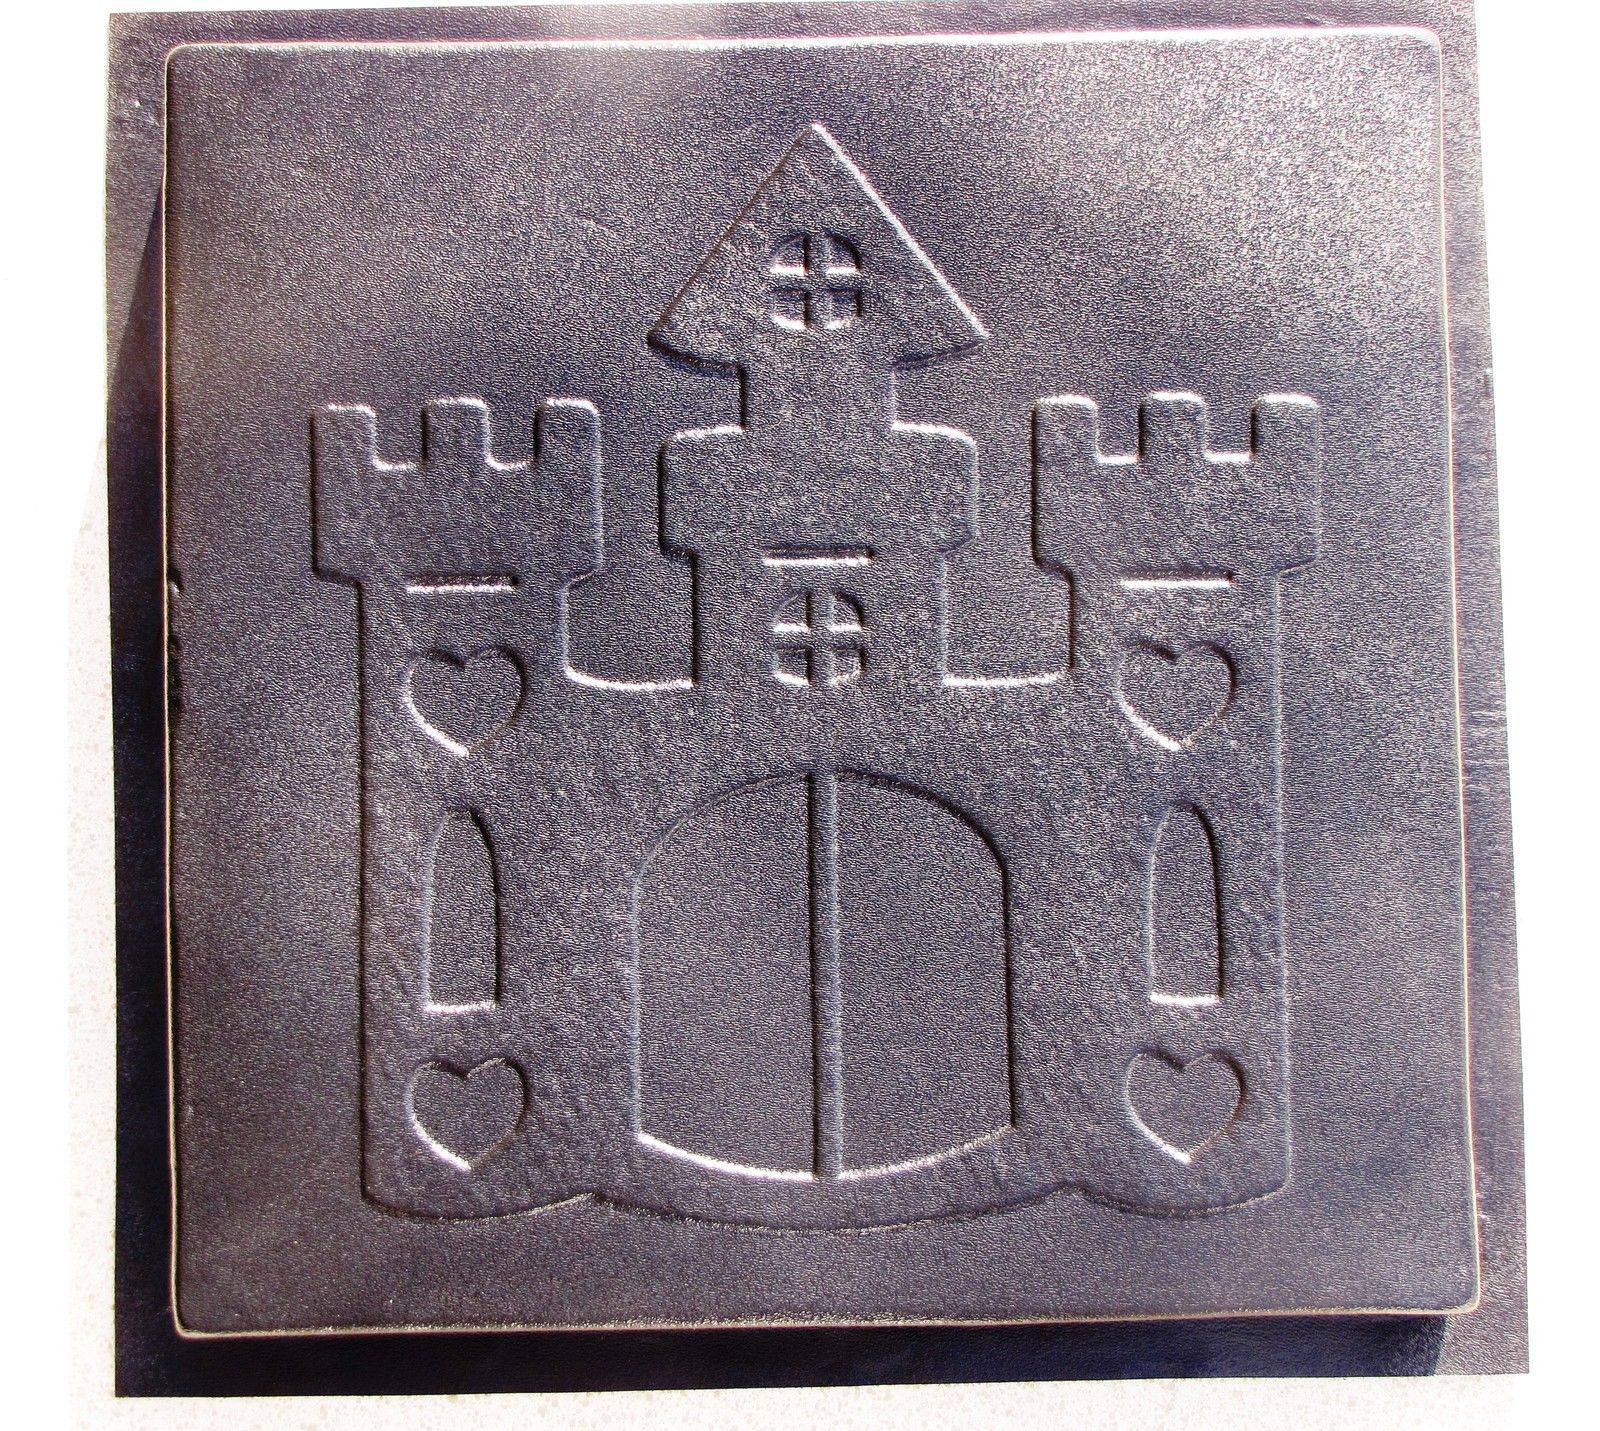 Primary image for Whimsical Castle Stepping Stone Mold #1 Use Concrete Make 18x18 Stones For $2 Ea